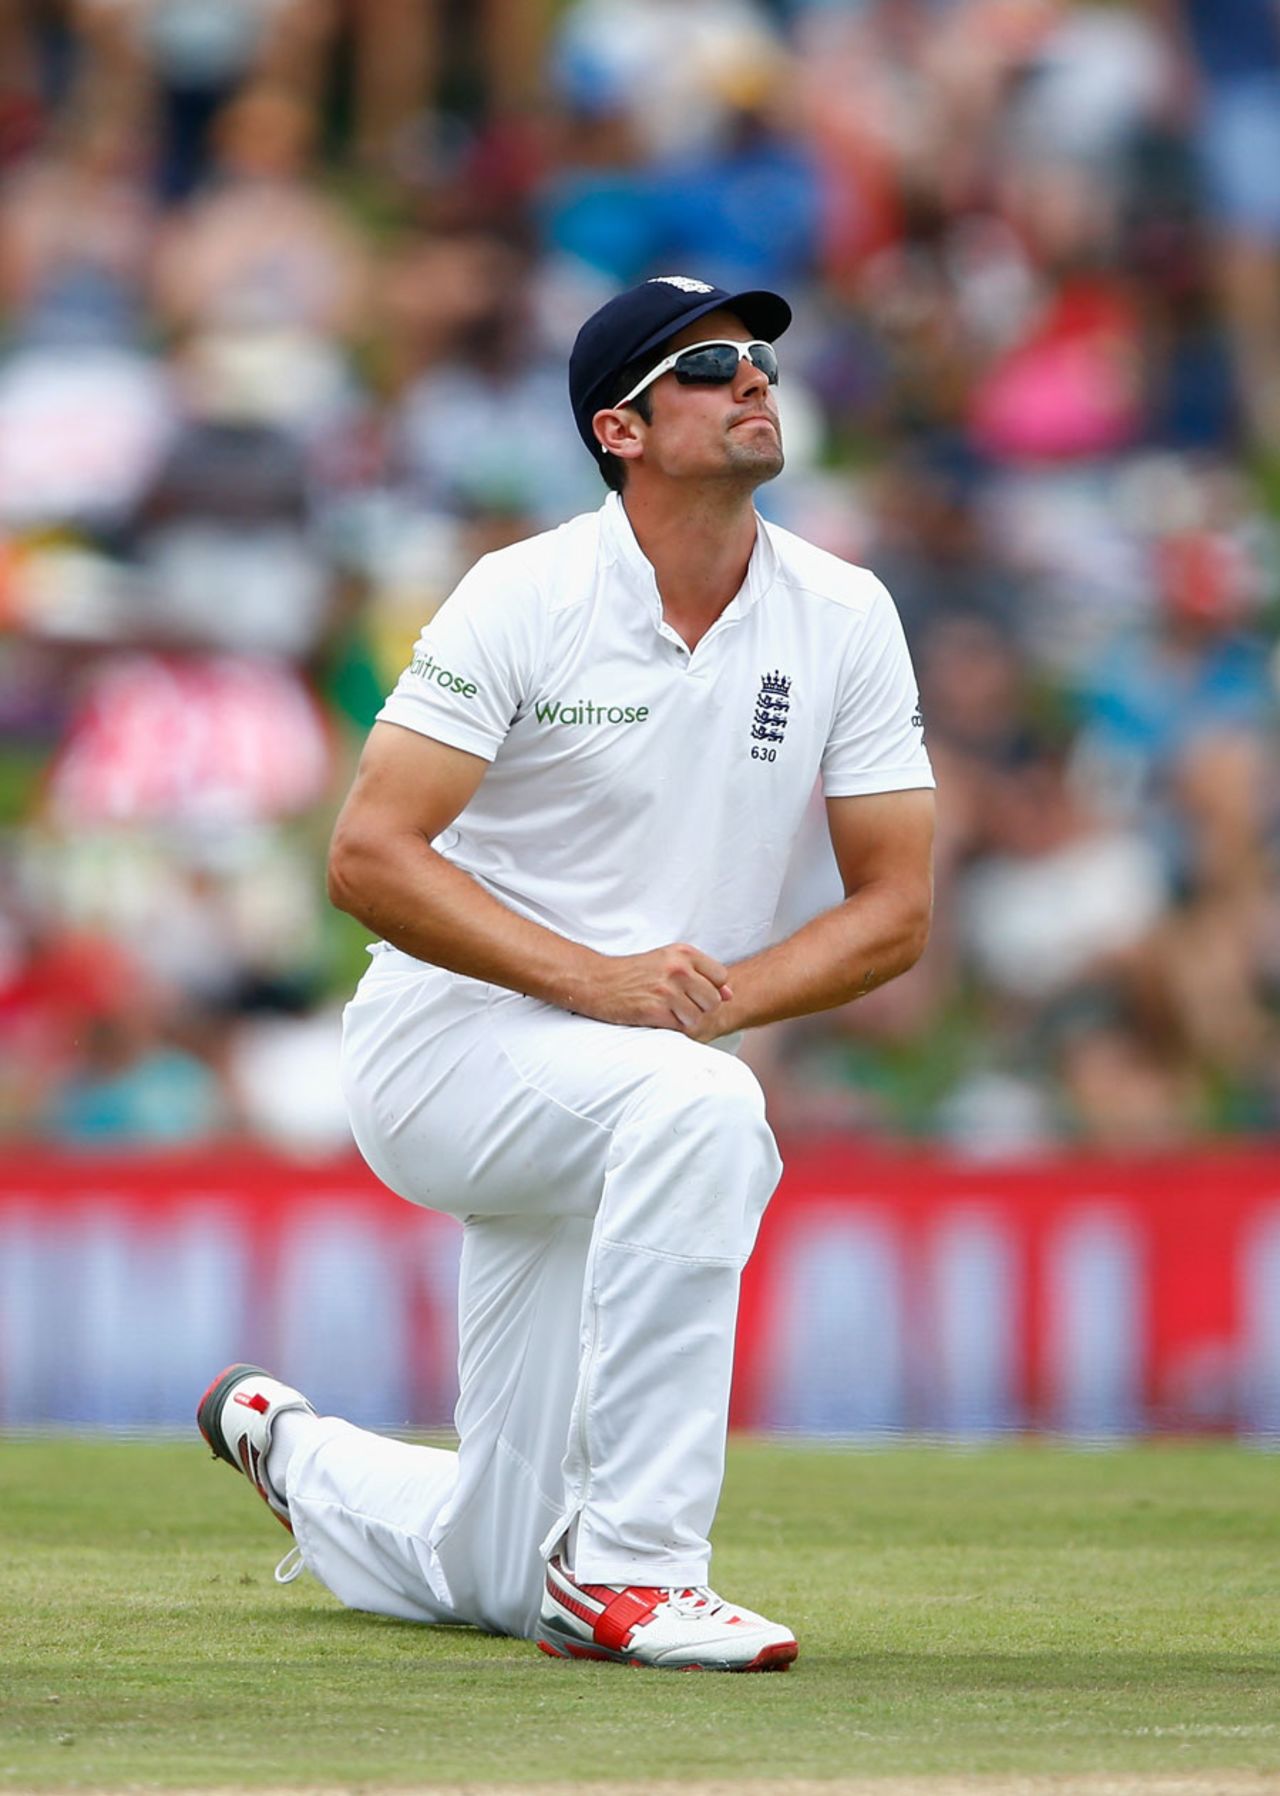 England saw several chances go begging, including a drop from Alastair Cook , South Africa v England, 4th Test, Centurion, 2nd day, January 23, 2016